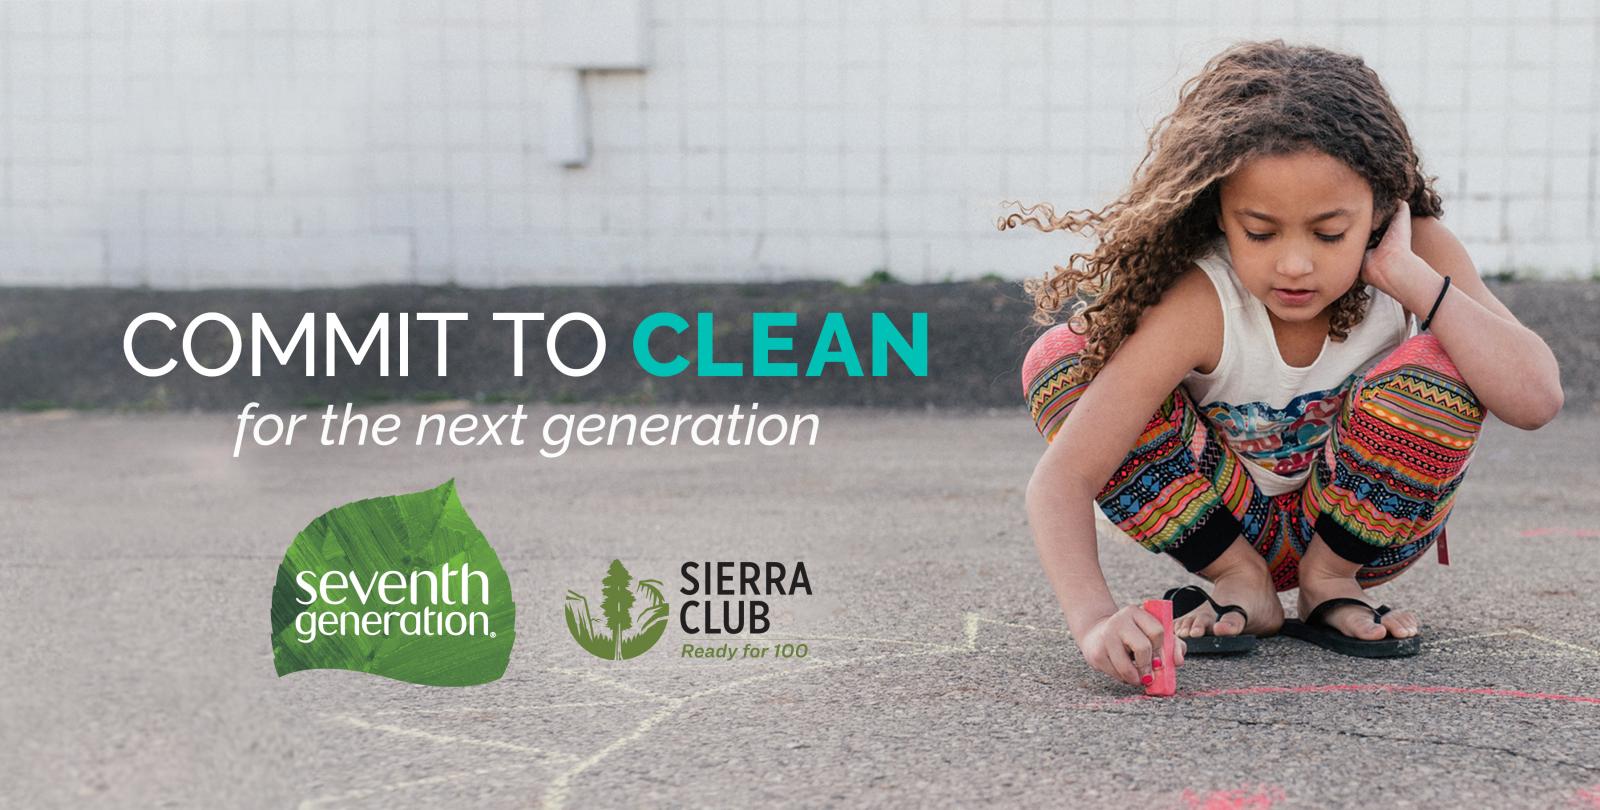 Young girl creating art on the sidewalk: Commit to Clean